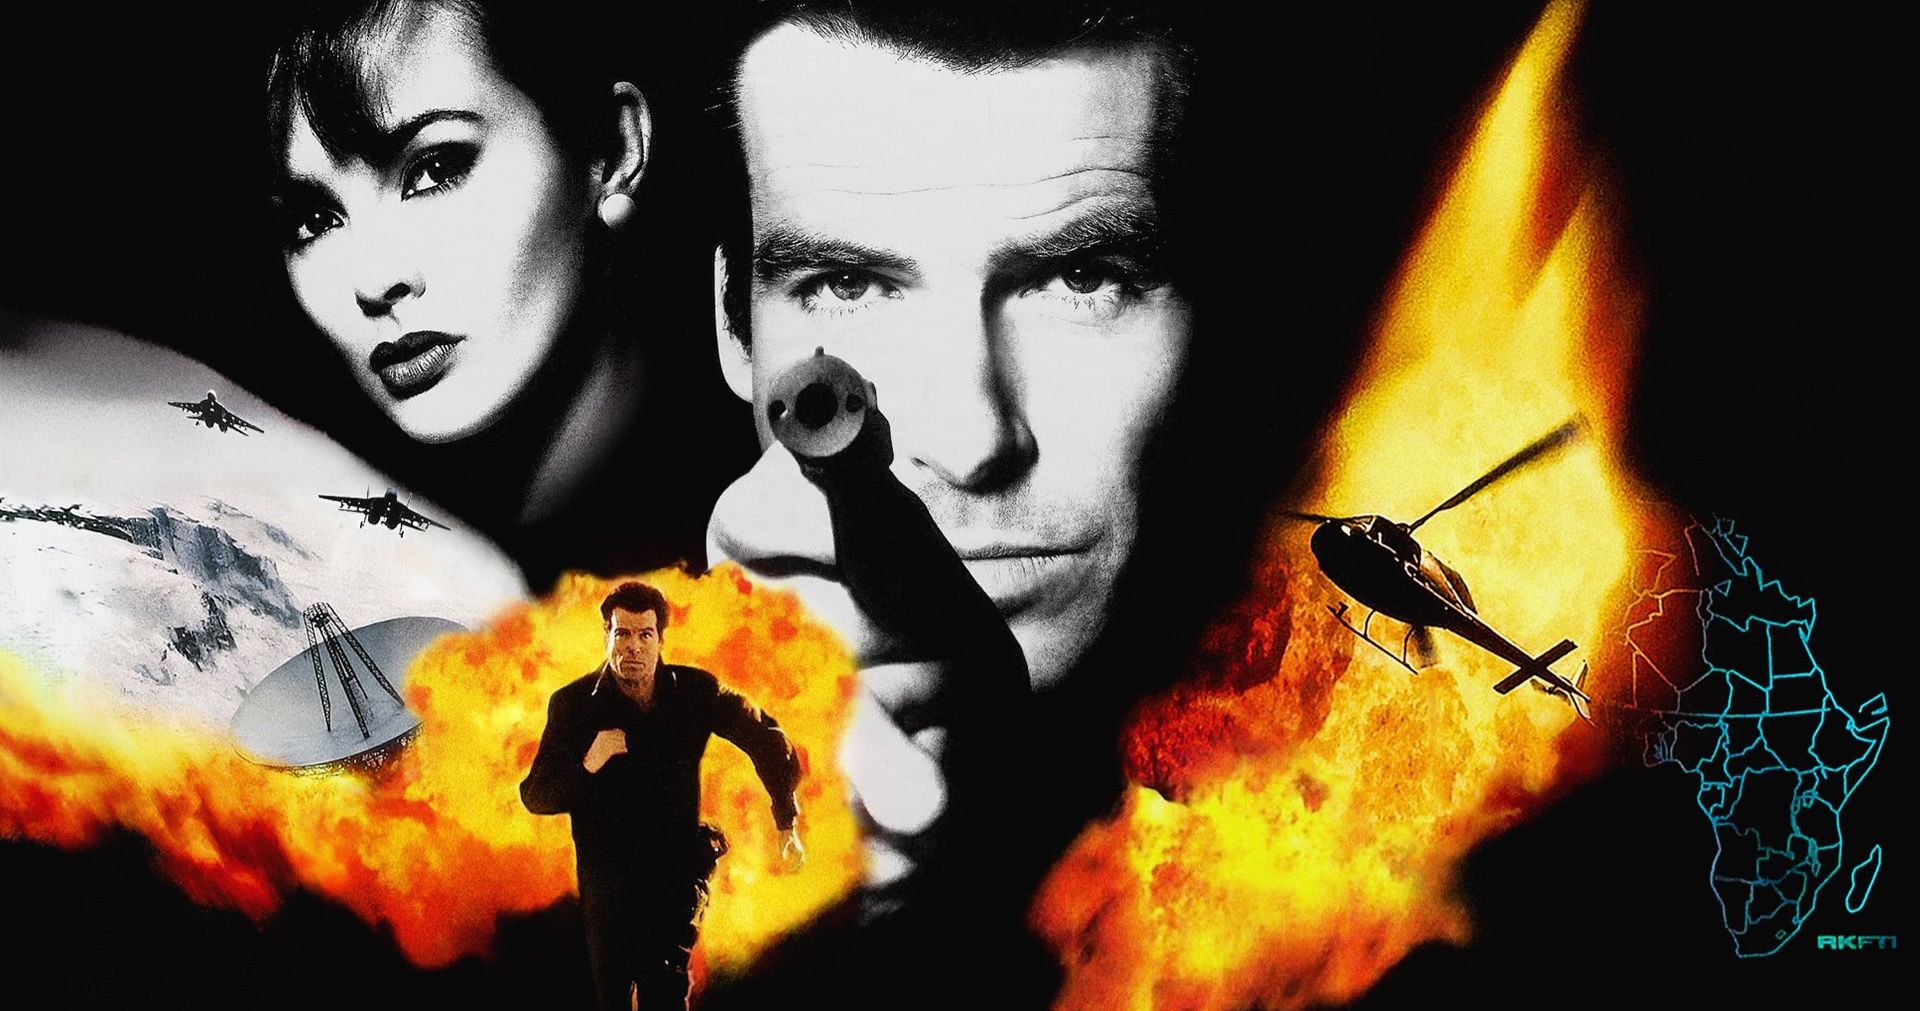 GoldenEye and Casino Royale Director Martin Campbell Is Game to Direct Bond 26